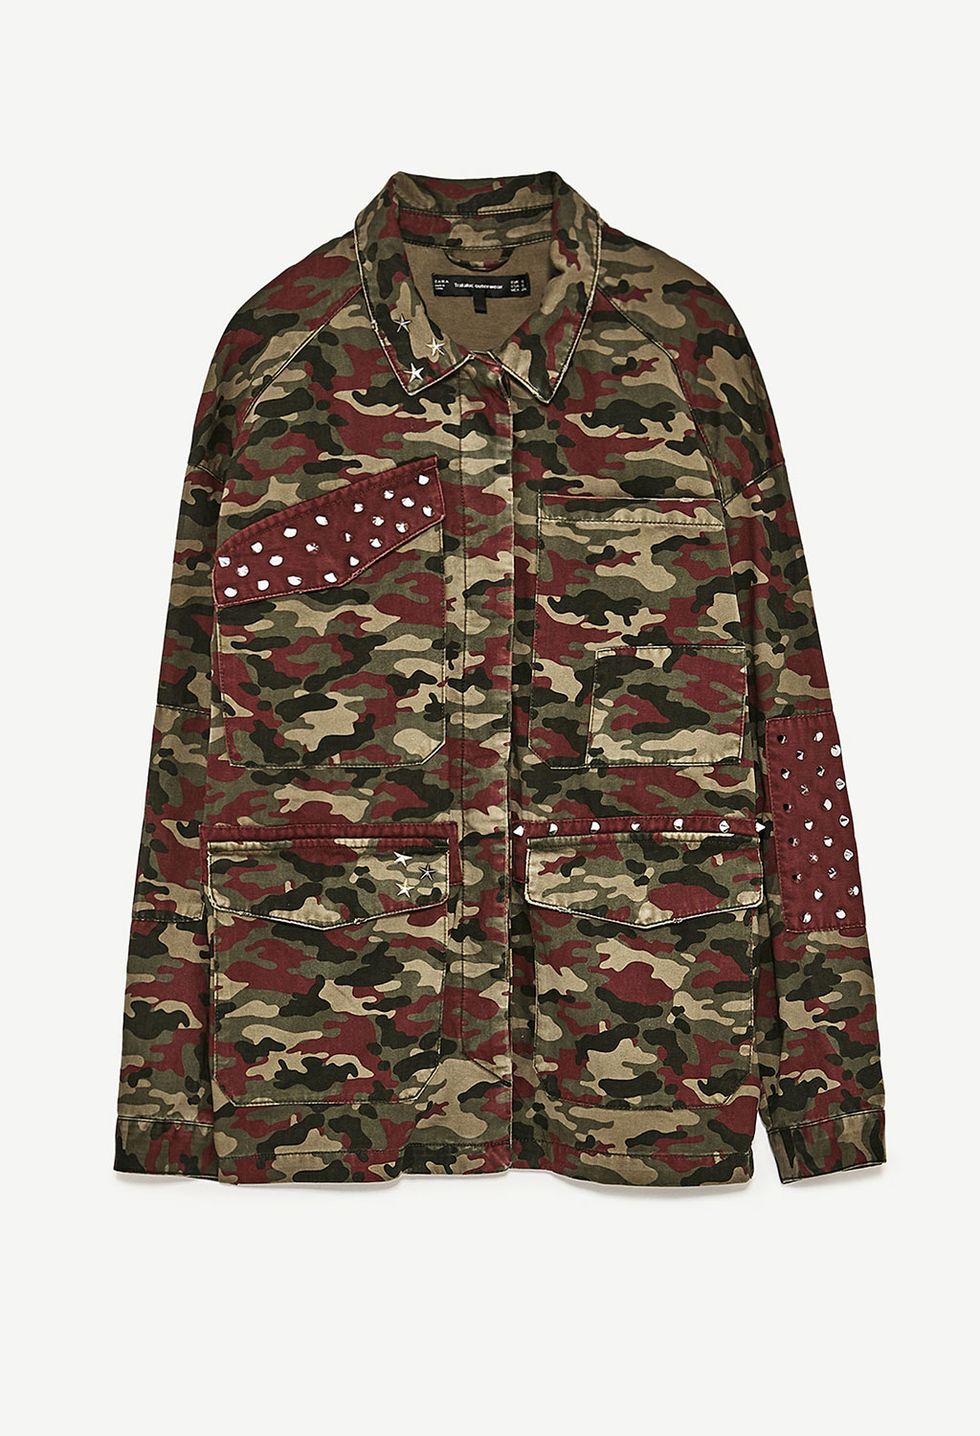 Clothing, Outerwear, Sleeve, Military camouflage, Camouflage, Jacket, Pattern, Collar, Design, Uniform, 